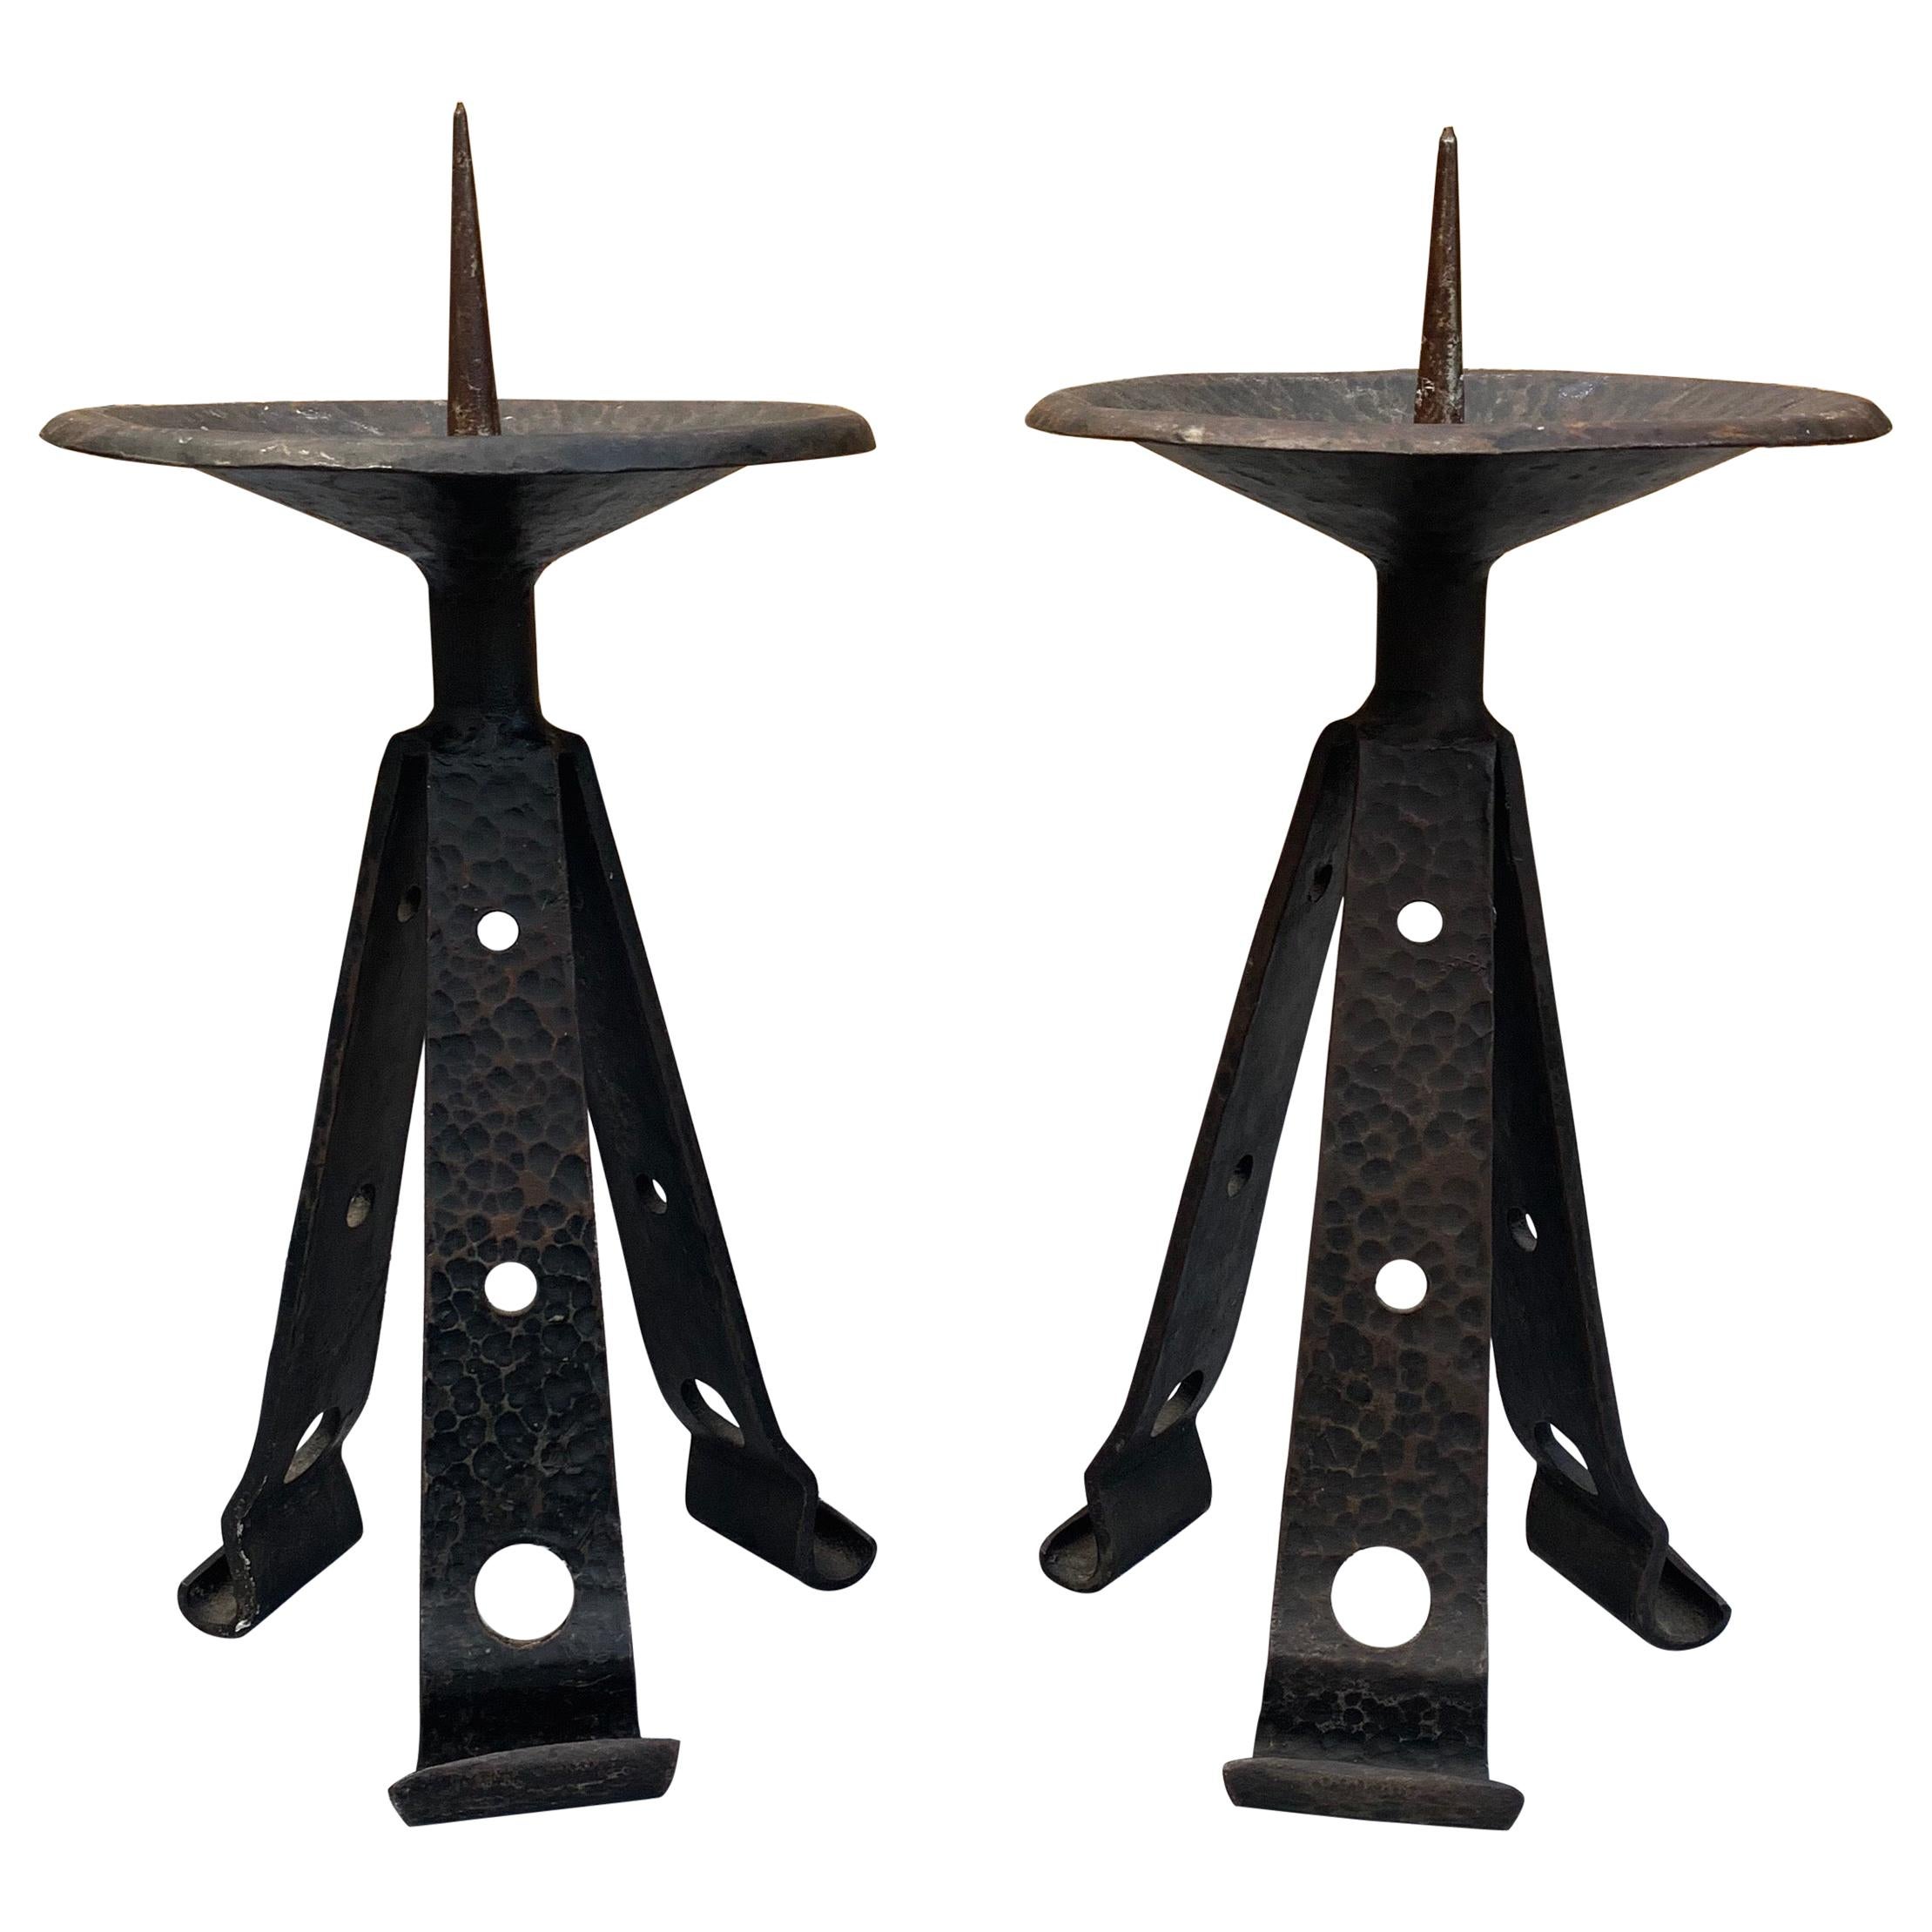 Rare & Sturdy Pair of Brutalist Forged Wrought Iron Candlesticks / Candleholders